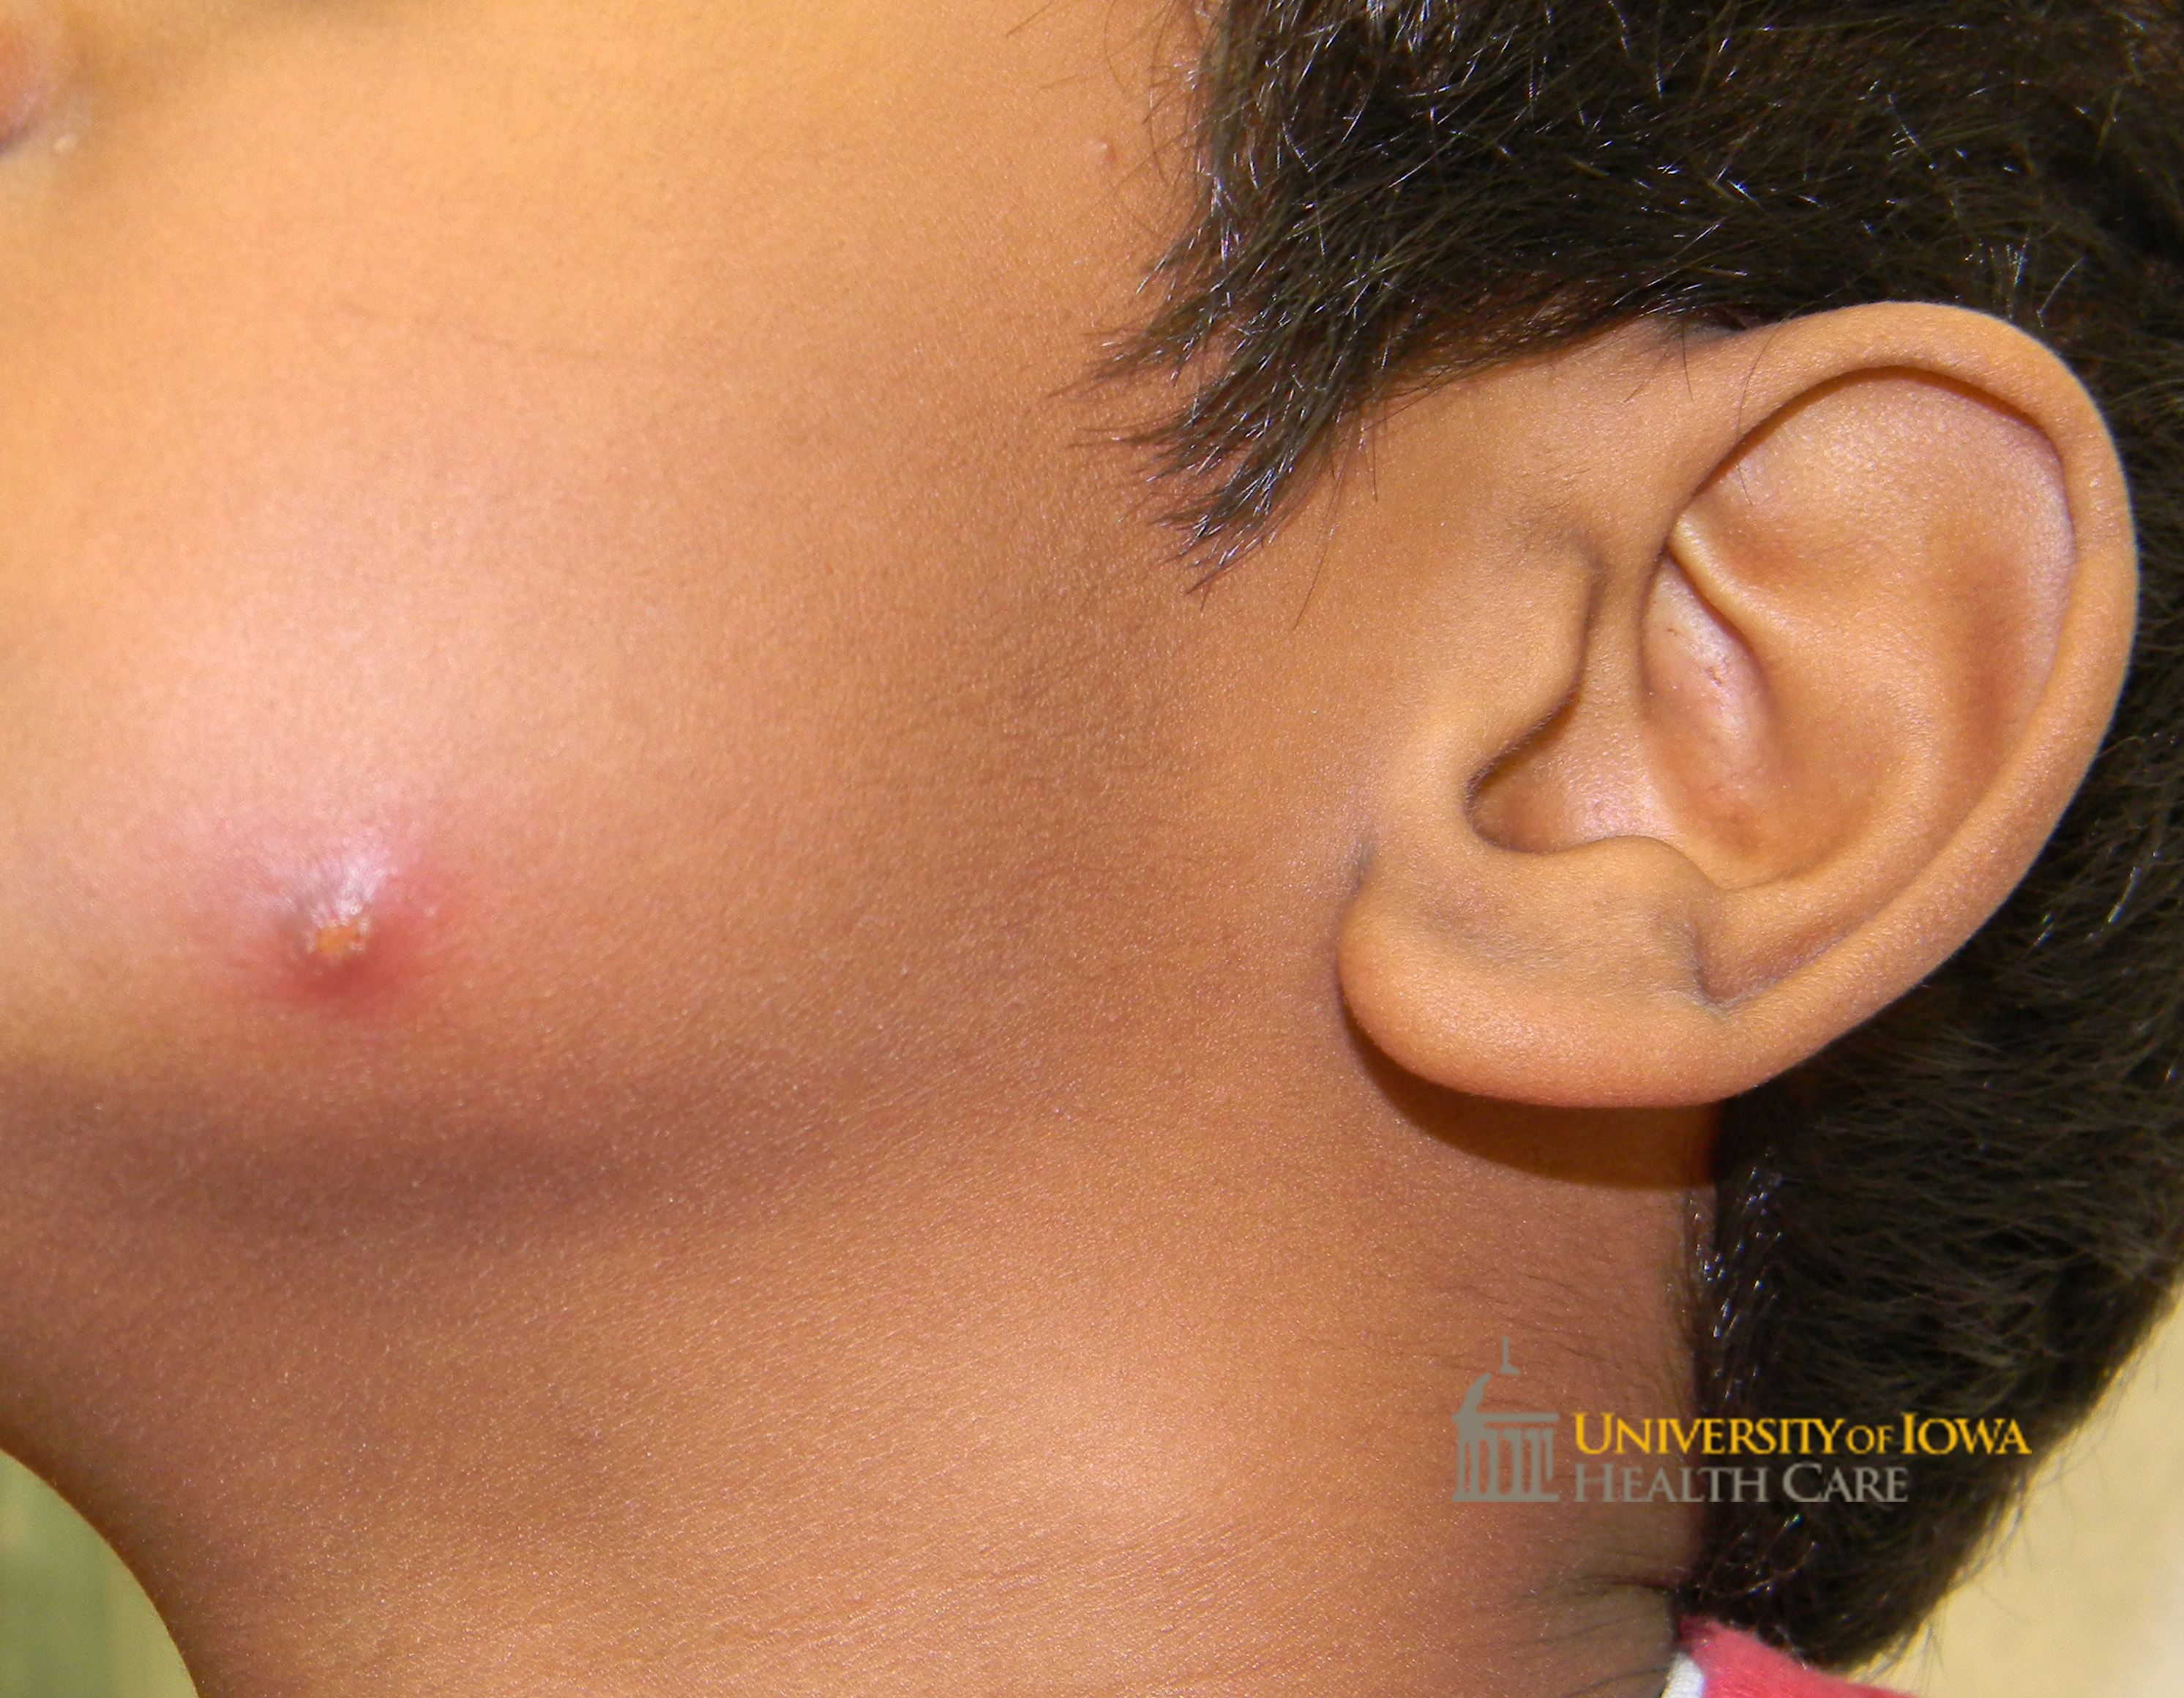 Yellow papule with surrounding erythema on the cheek. (click images for higher resolution).